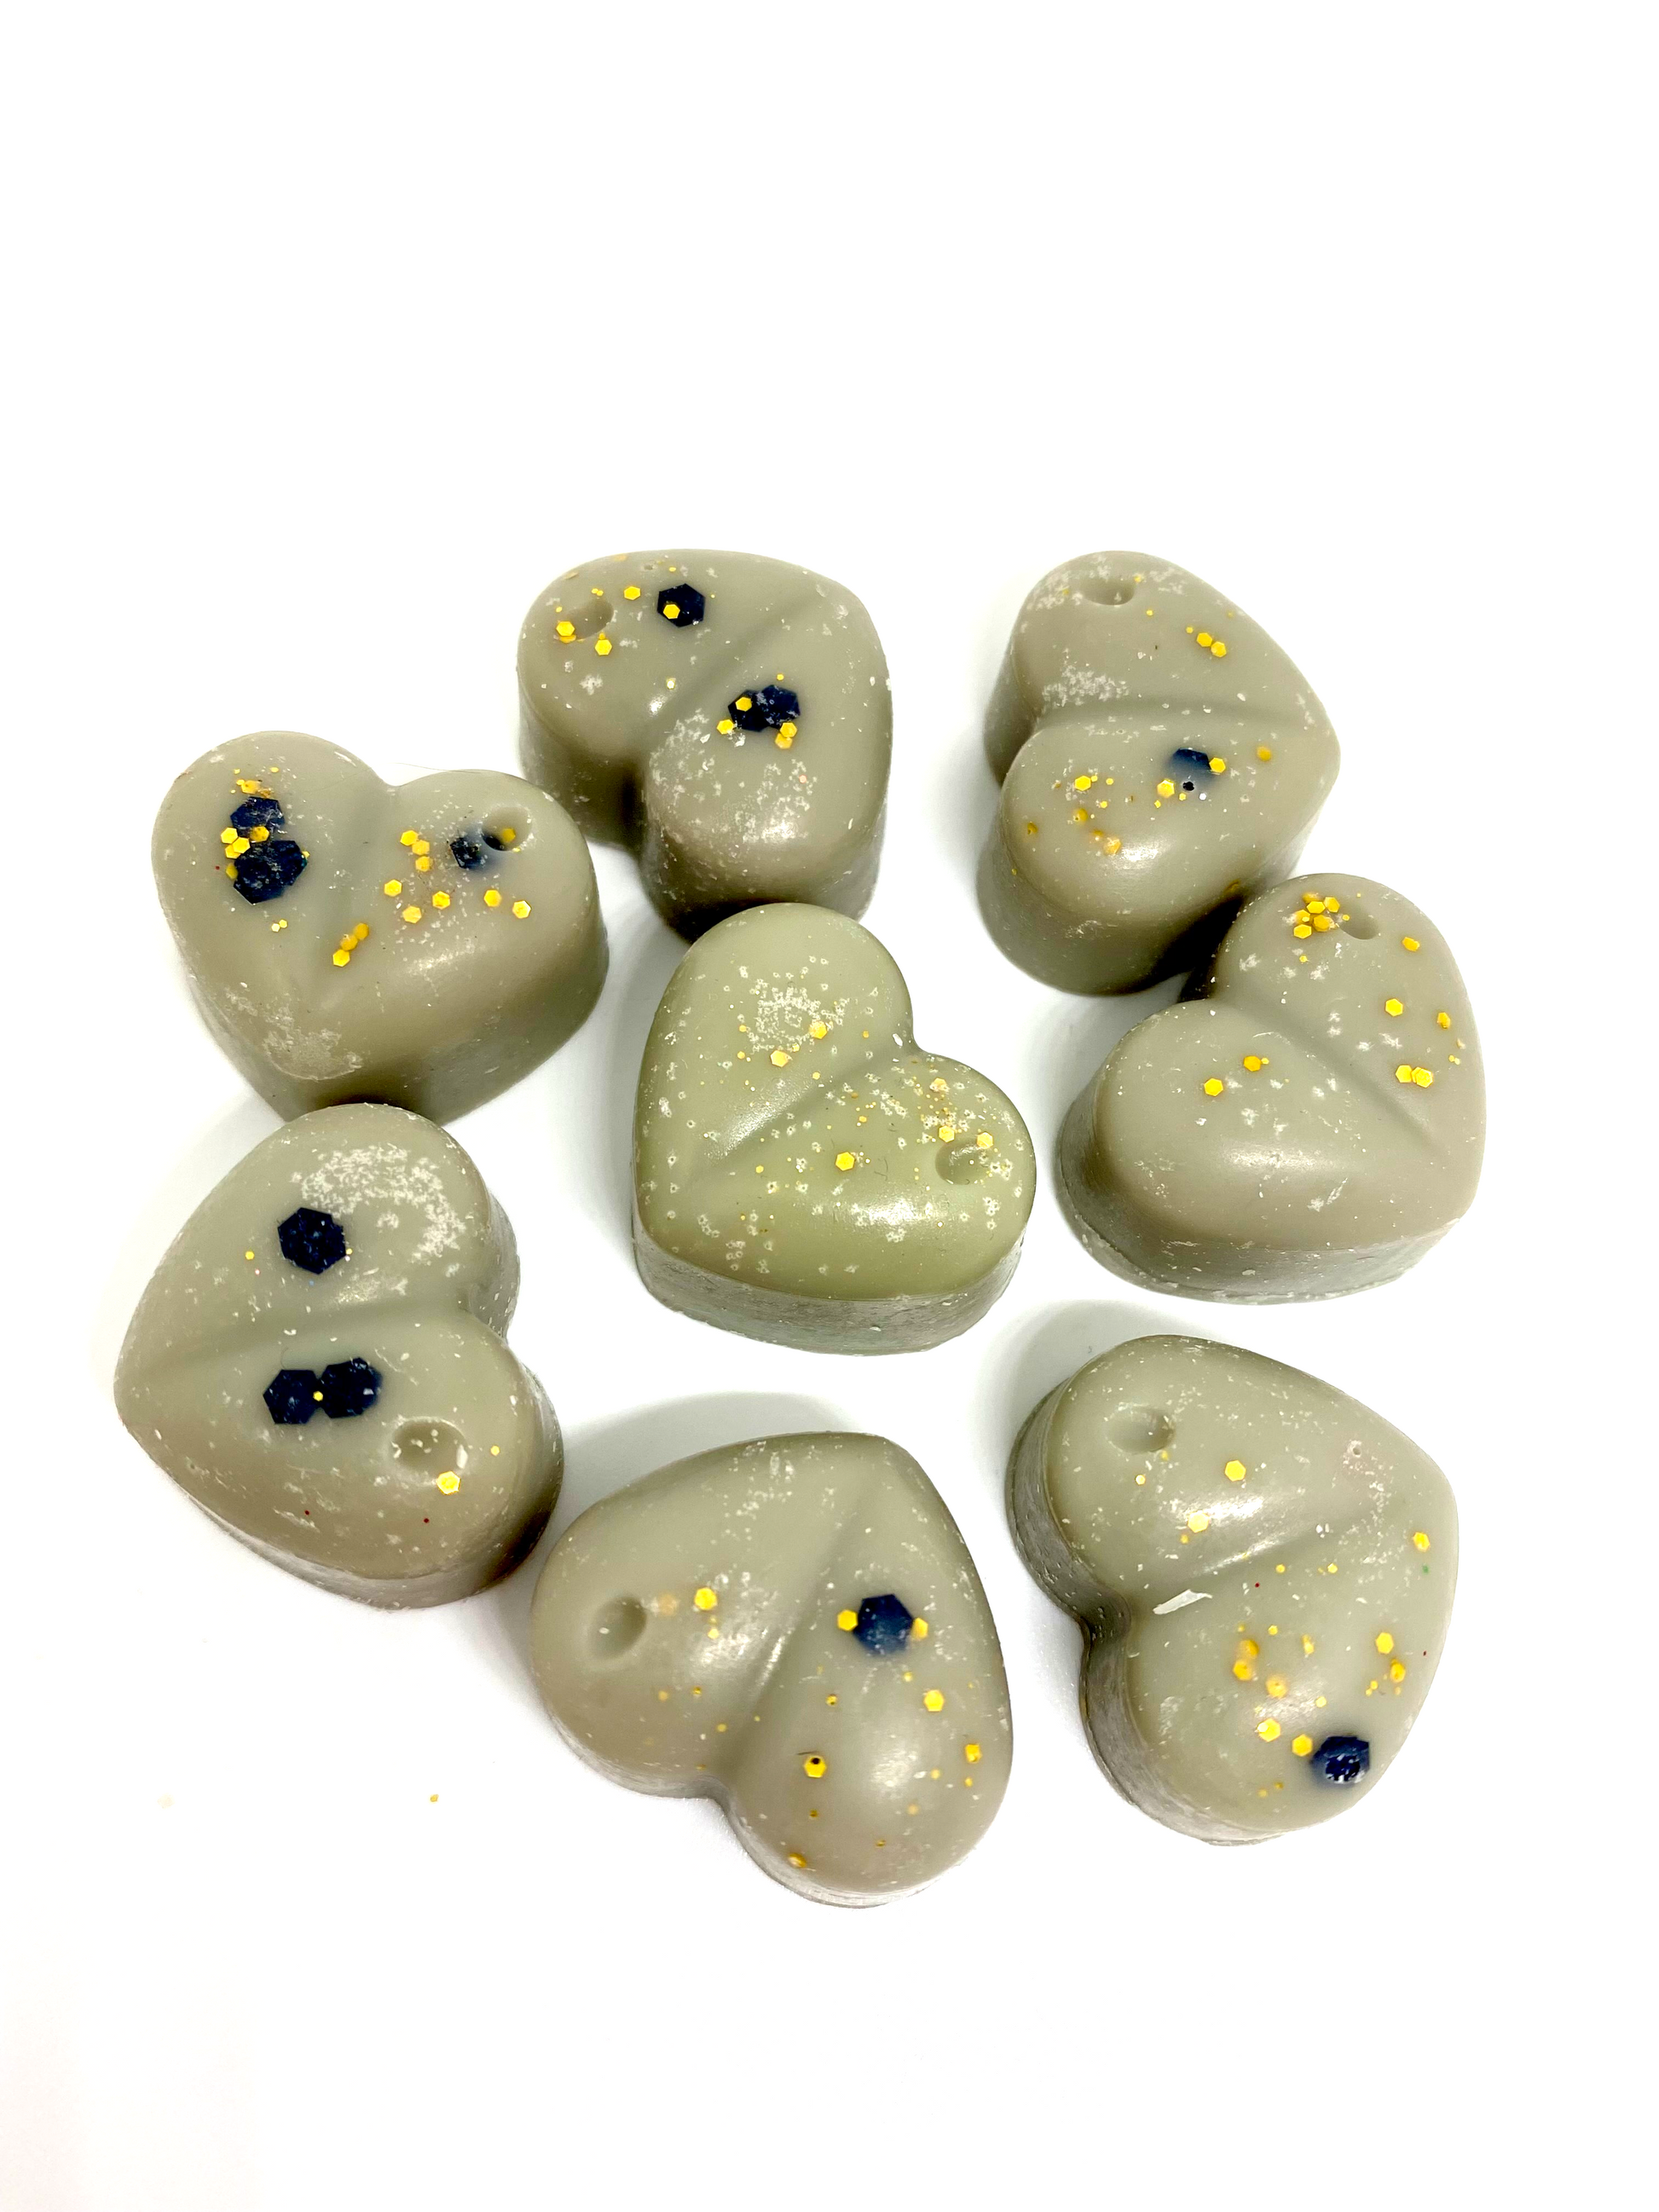 Tobacco Vanille Wax Melts Inspired by TF - ScentiMelti  Tobacco Vanille Wax Melts Inspired by TF